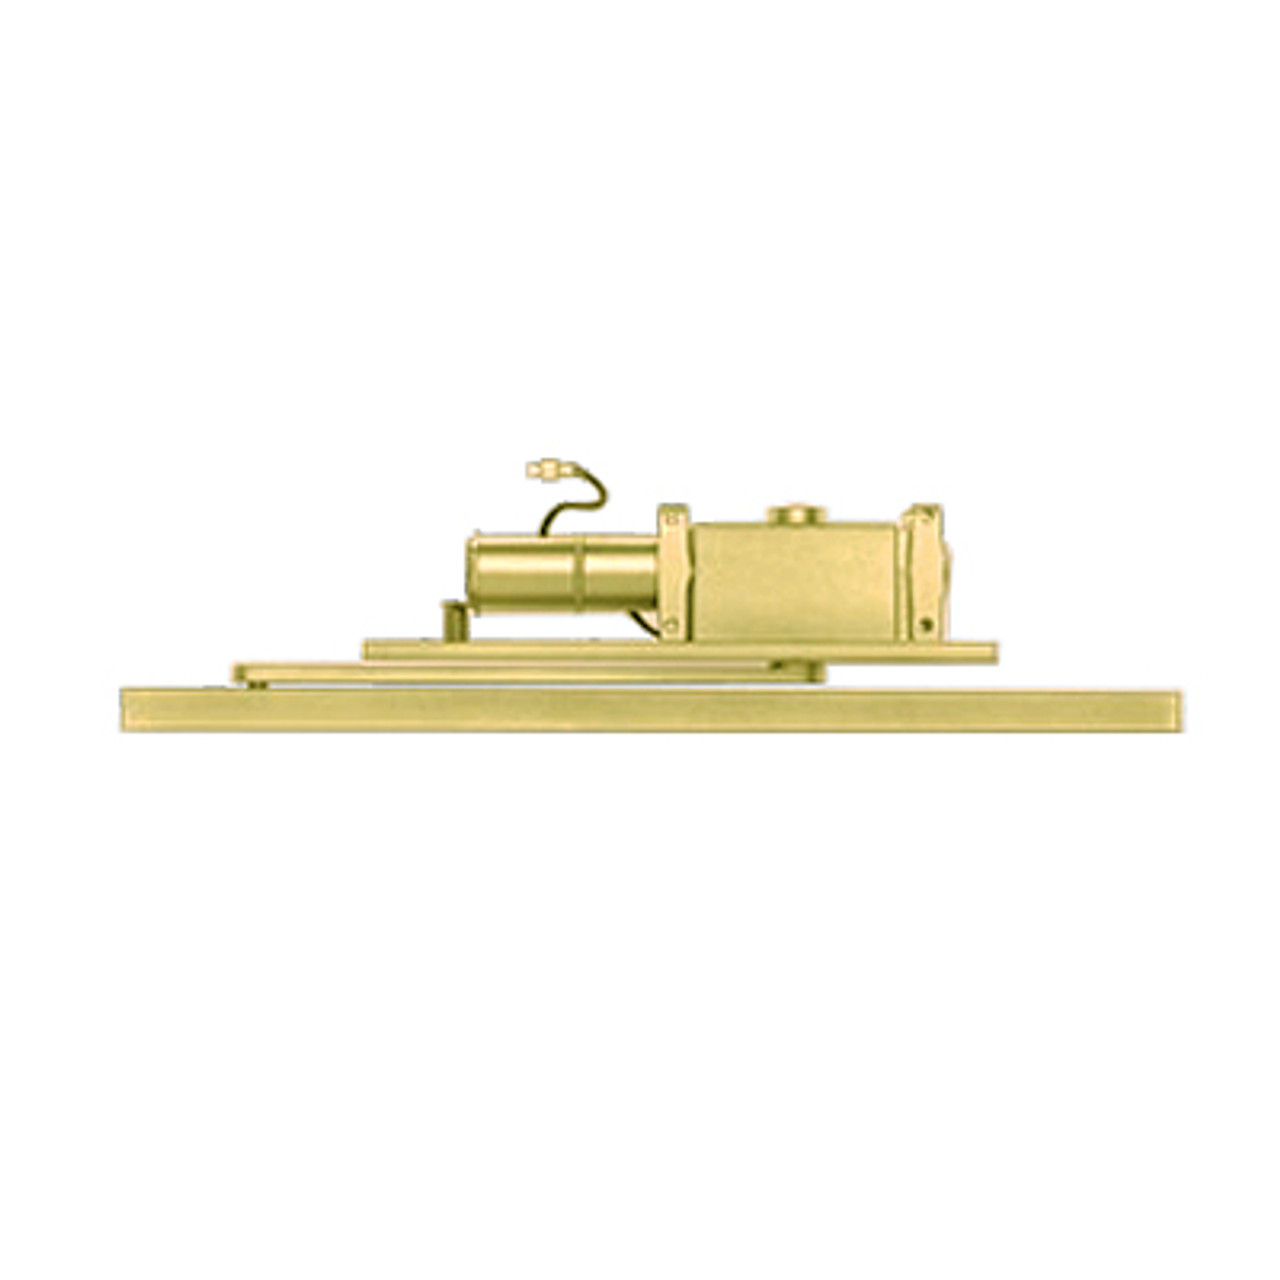 2214DPS-STD-RH-US3 LCN High Security Concealed Door Closer with Standard Arm in Bright Brass Finish